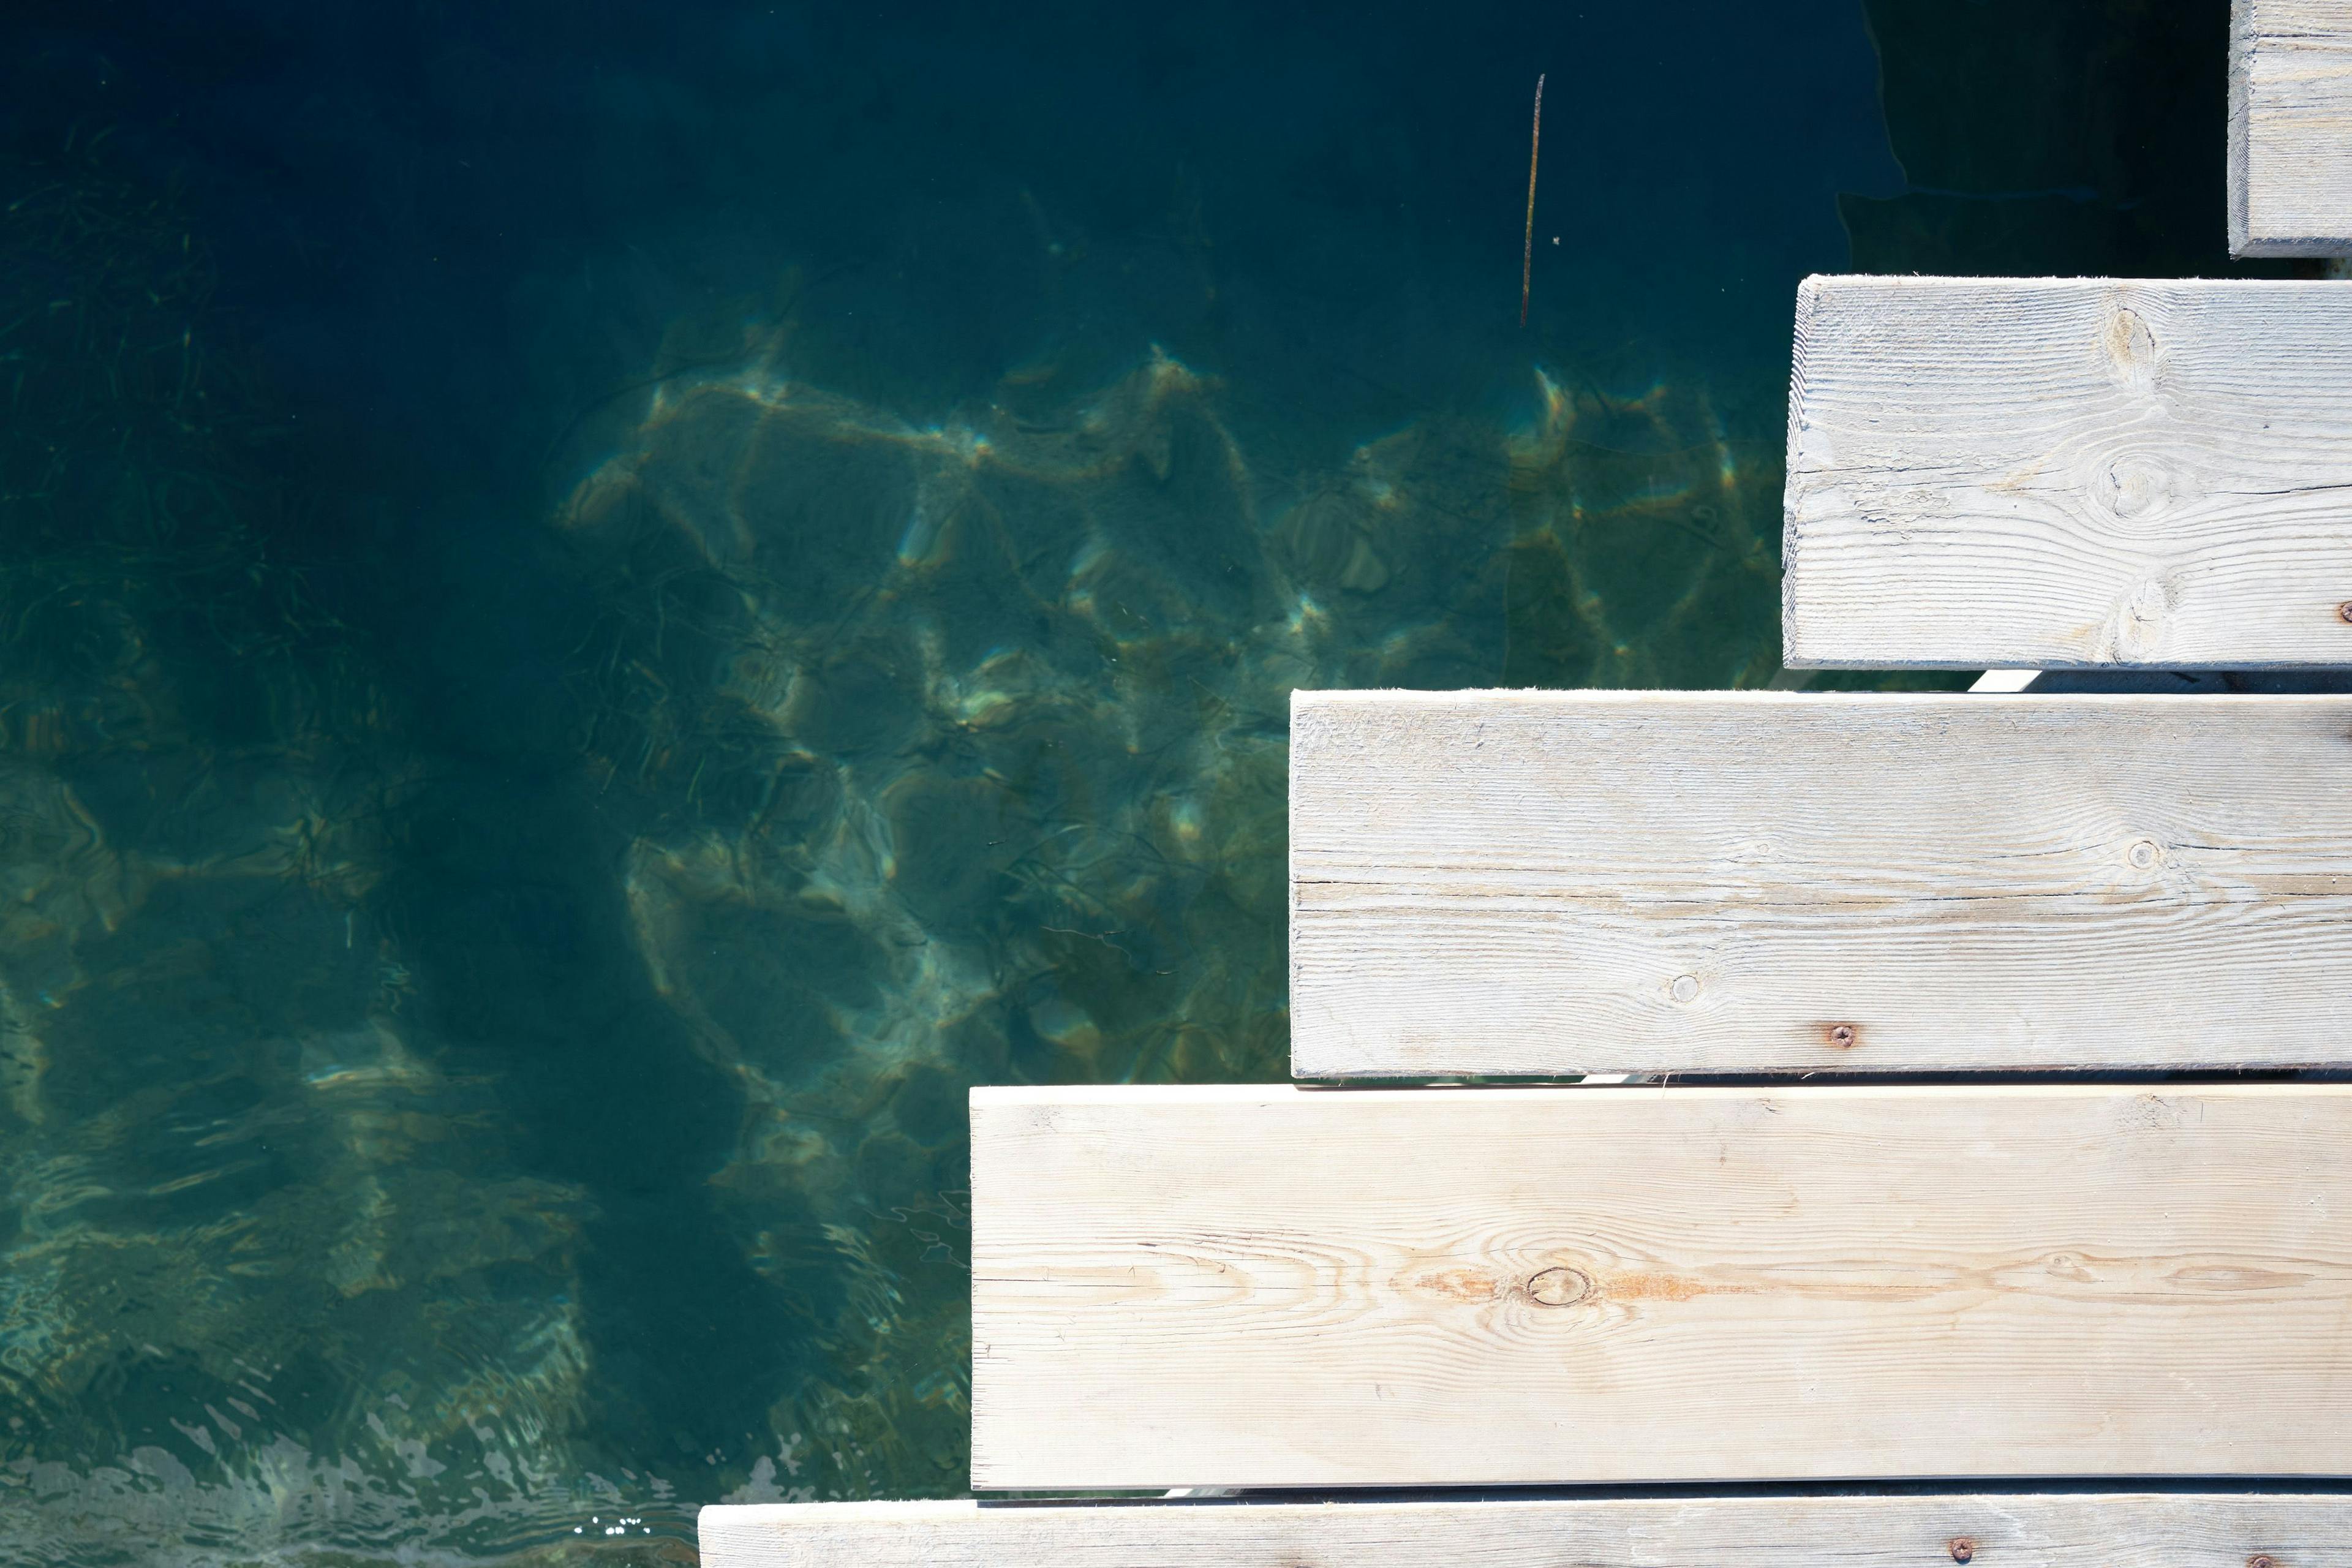 Looking down at boards of a jetty. The shape of the slats forms a step when viewed at this perspective